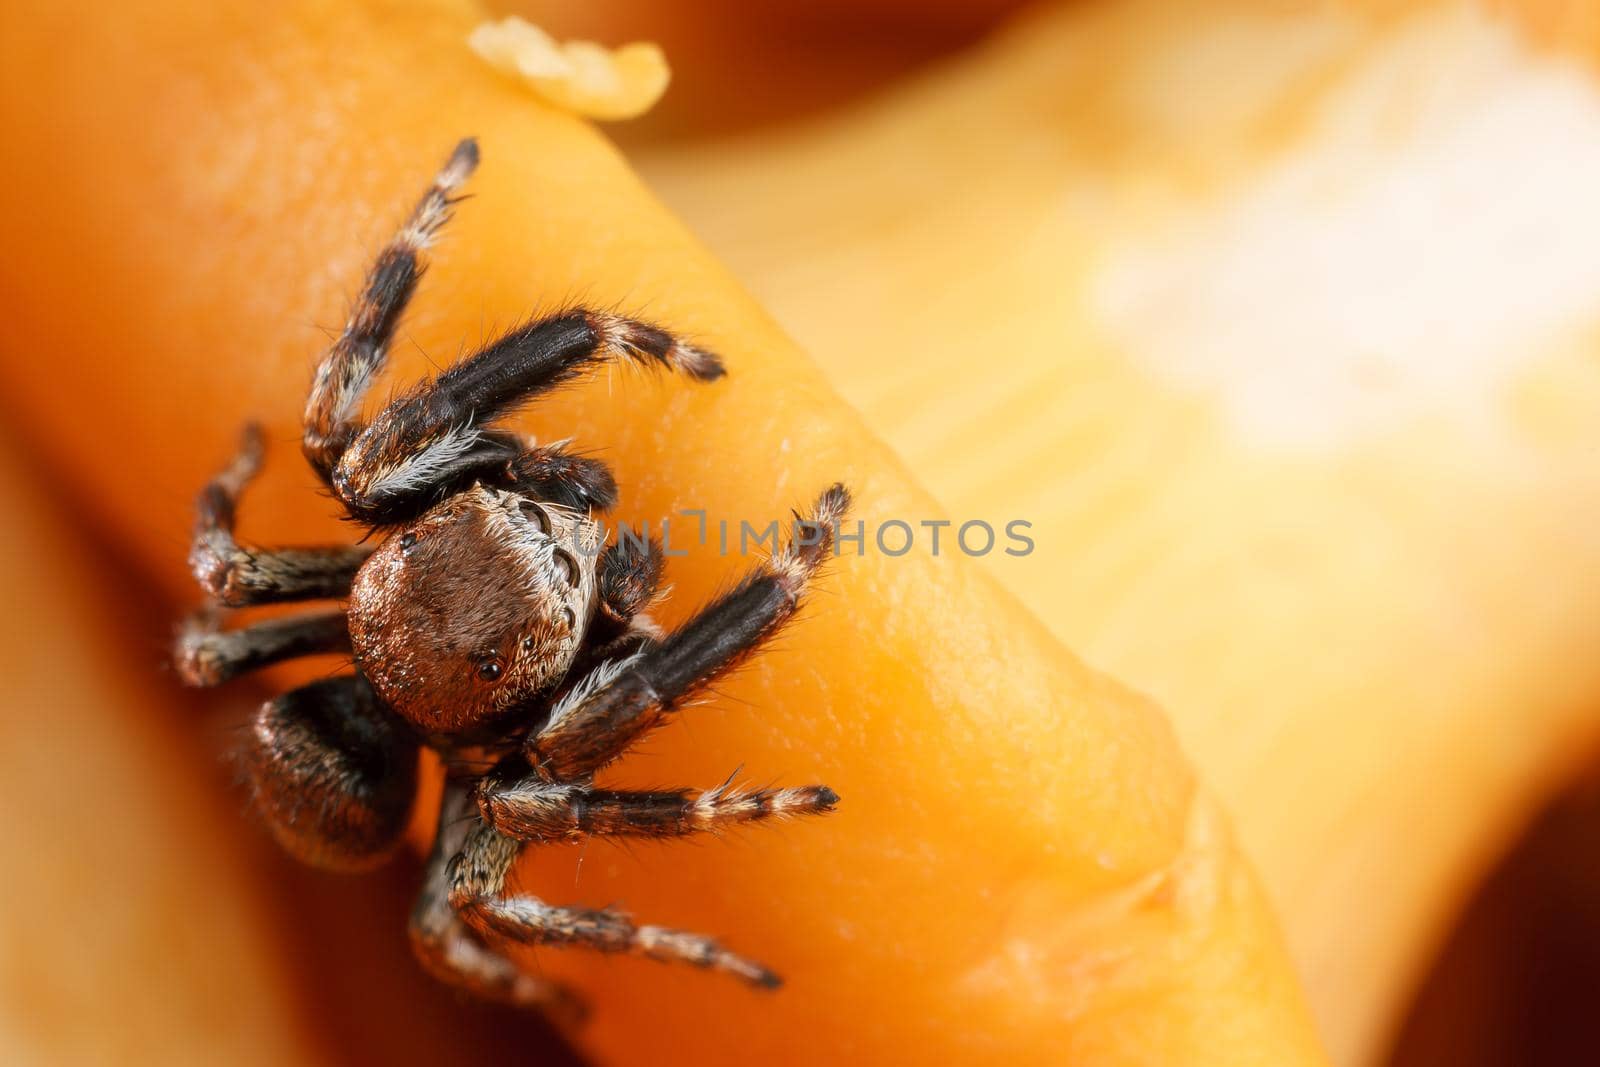 Jumping spider on the yellow chanterelle mushroom background by Lincikas